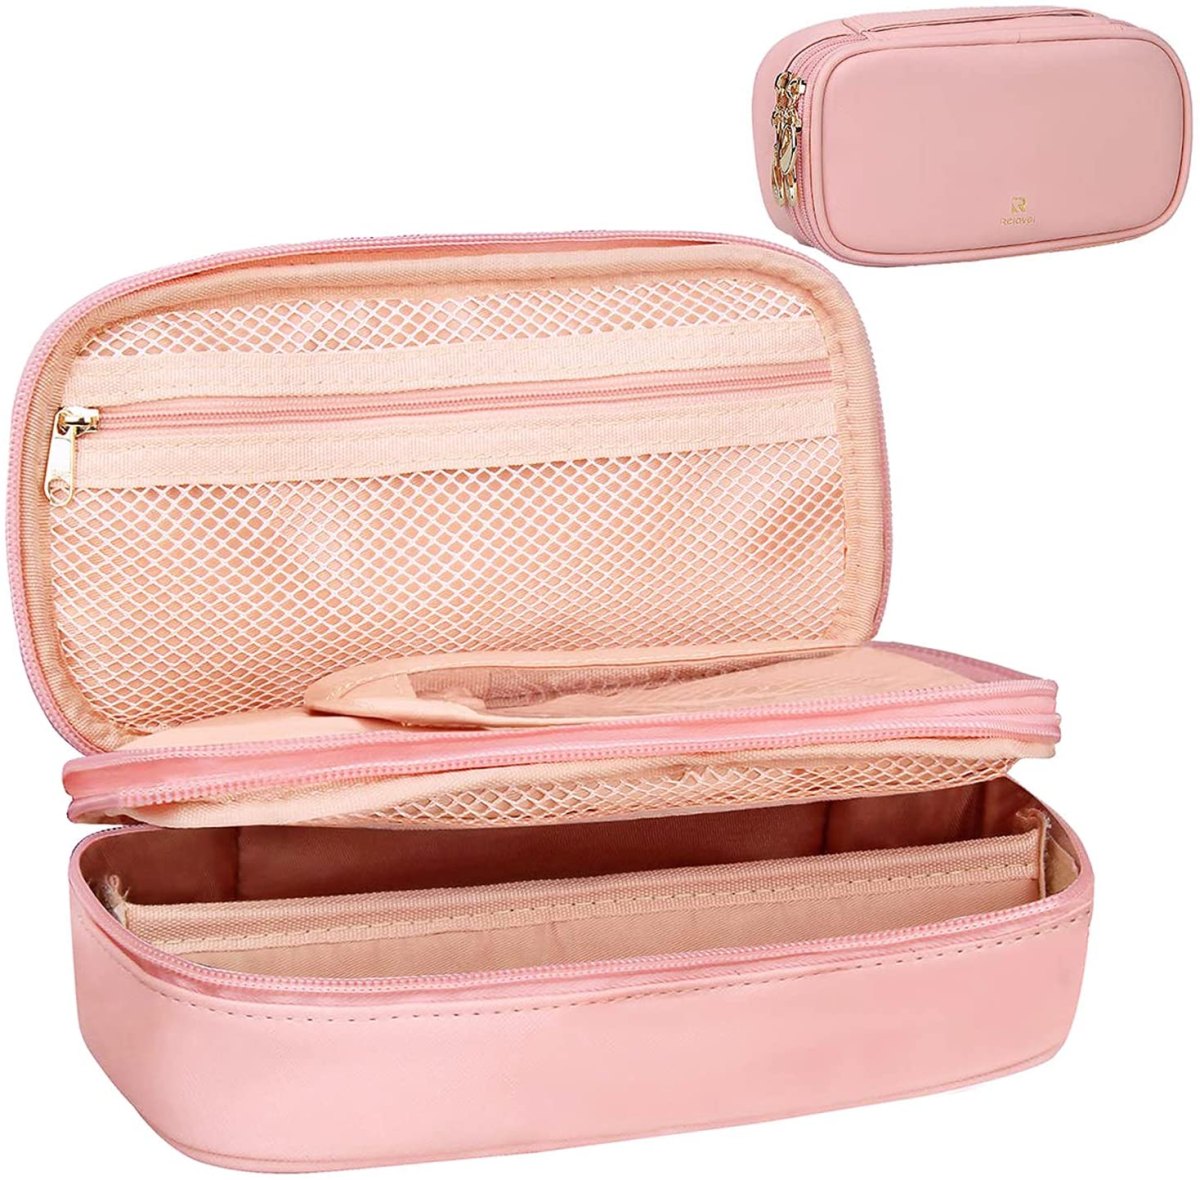 Up To 27% Off on 5PCS Cute Small Makeup Bags f